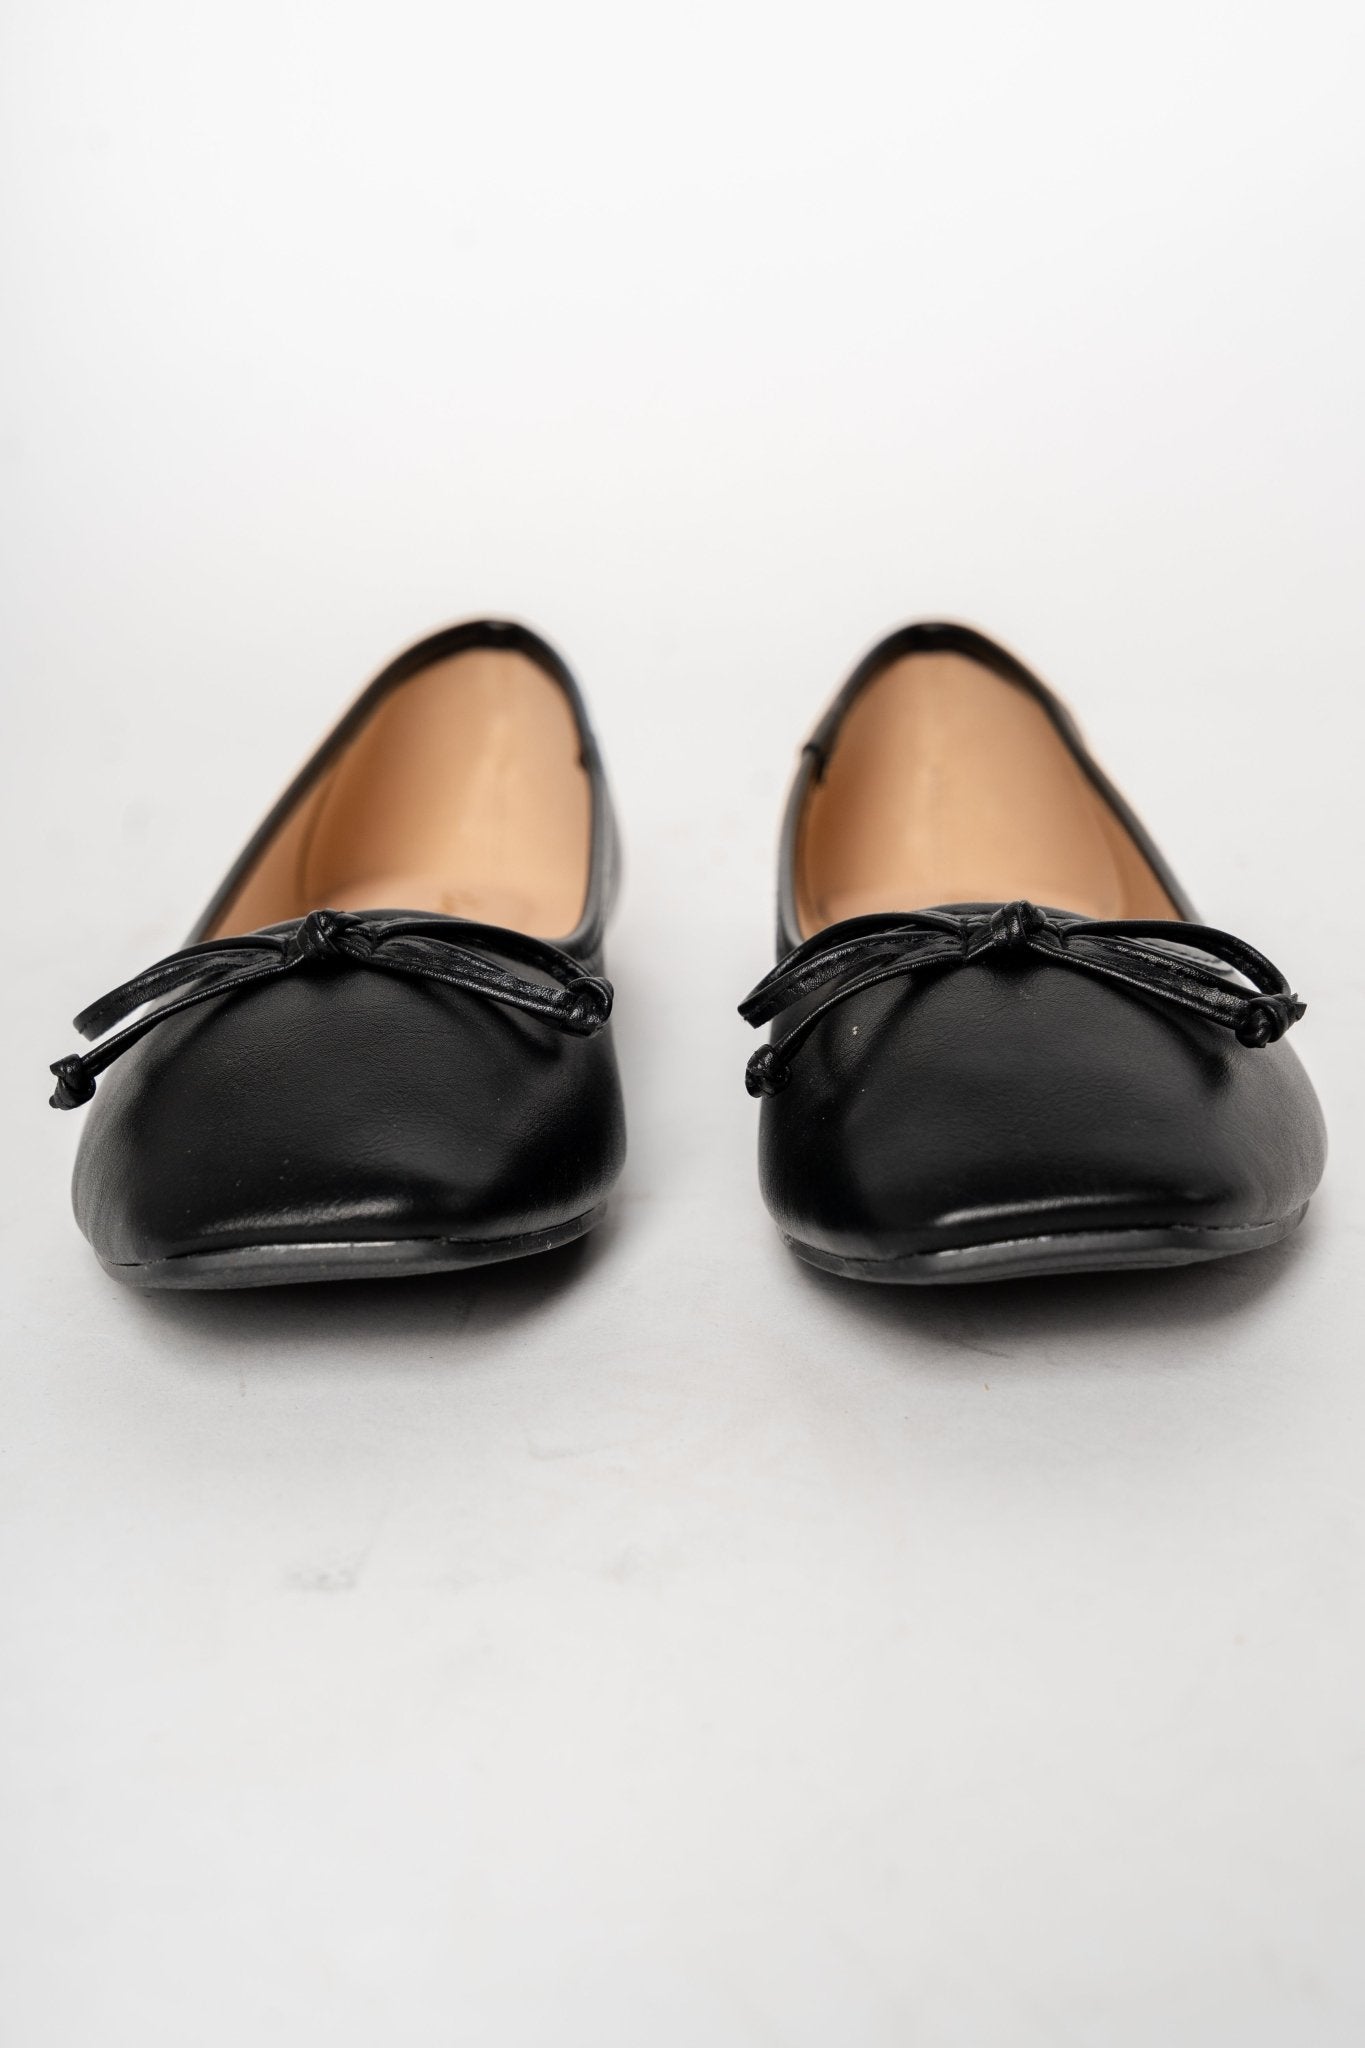 Tulin bow ballerina flats black - Trendy shoes - Fashion Shoes at Lush Fashion Lounge Boutique in Oklahoma City